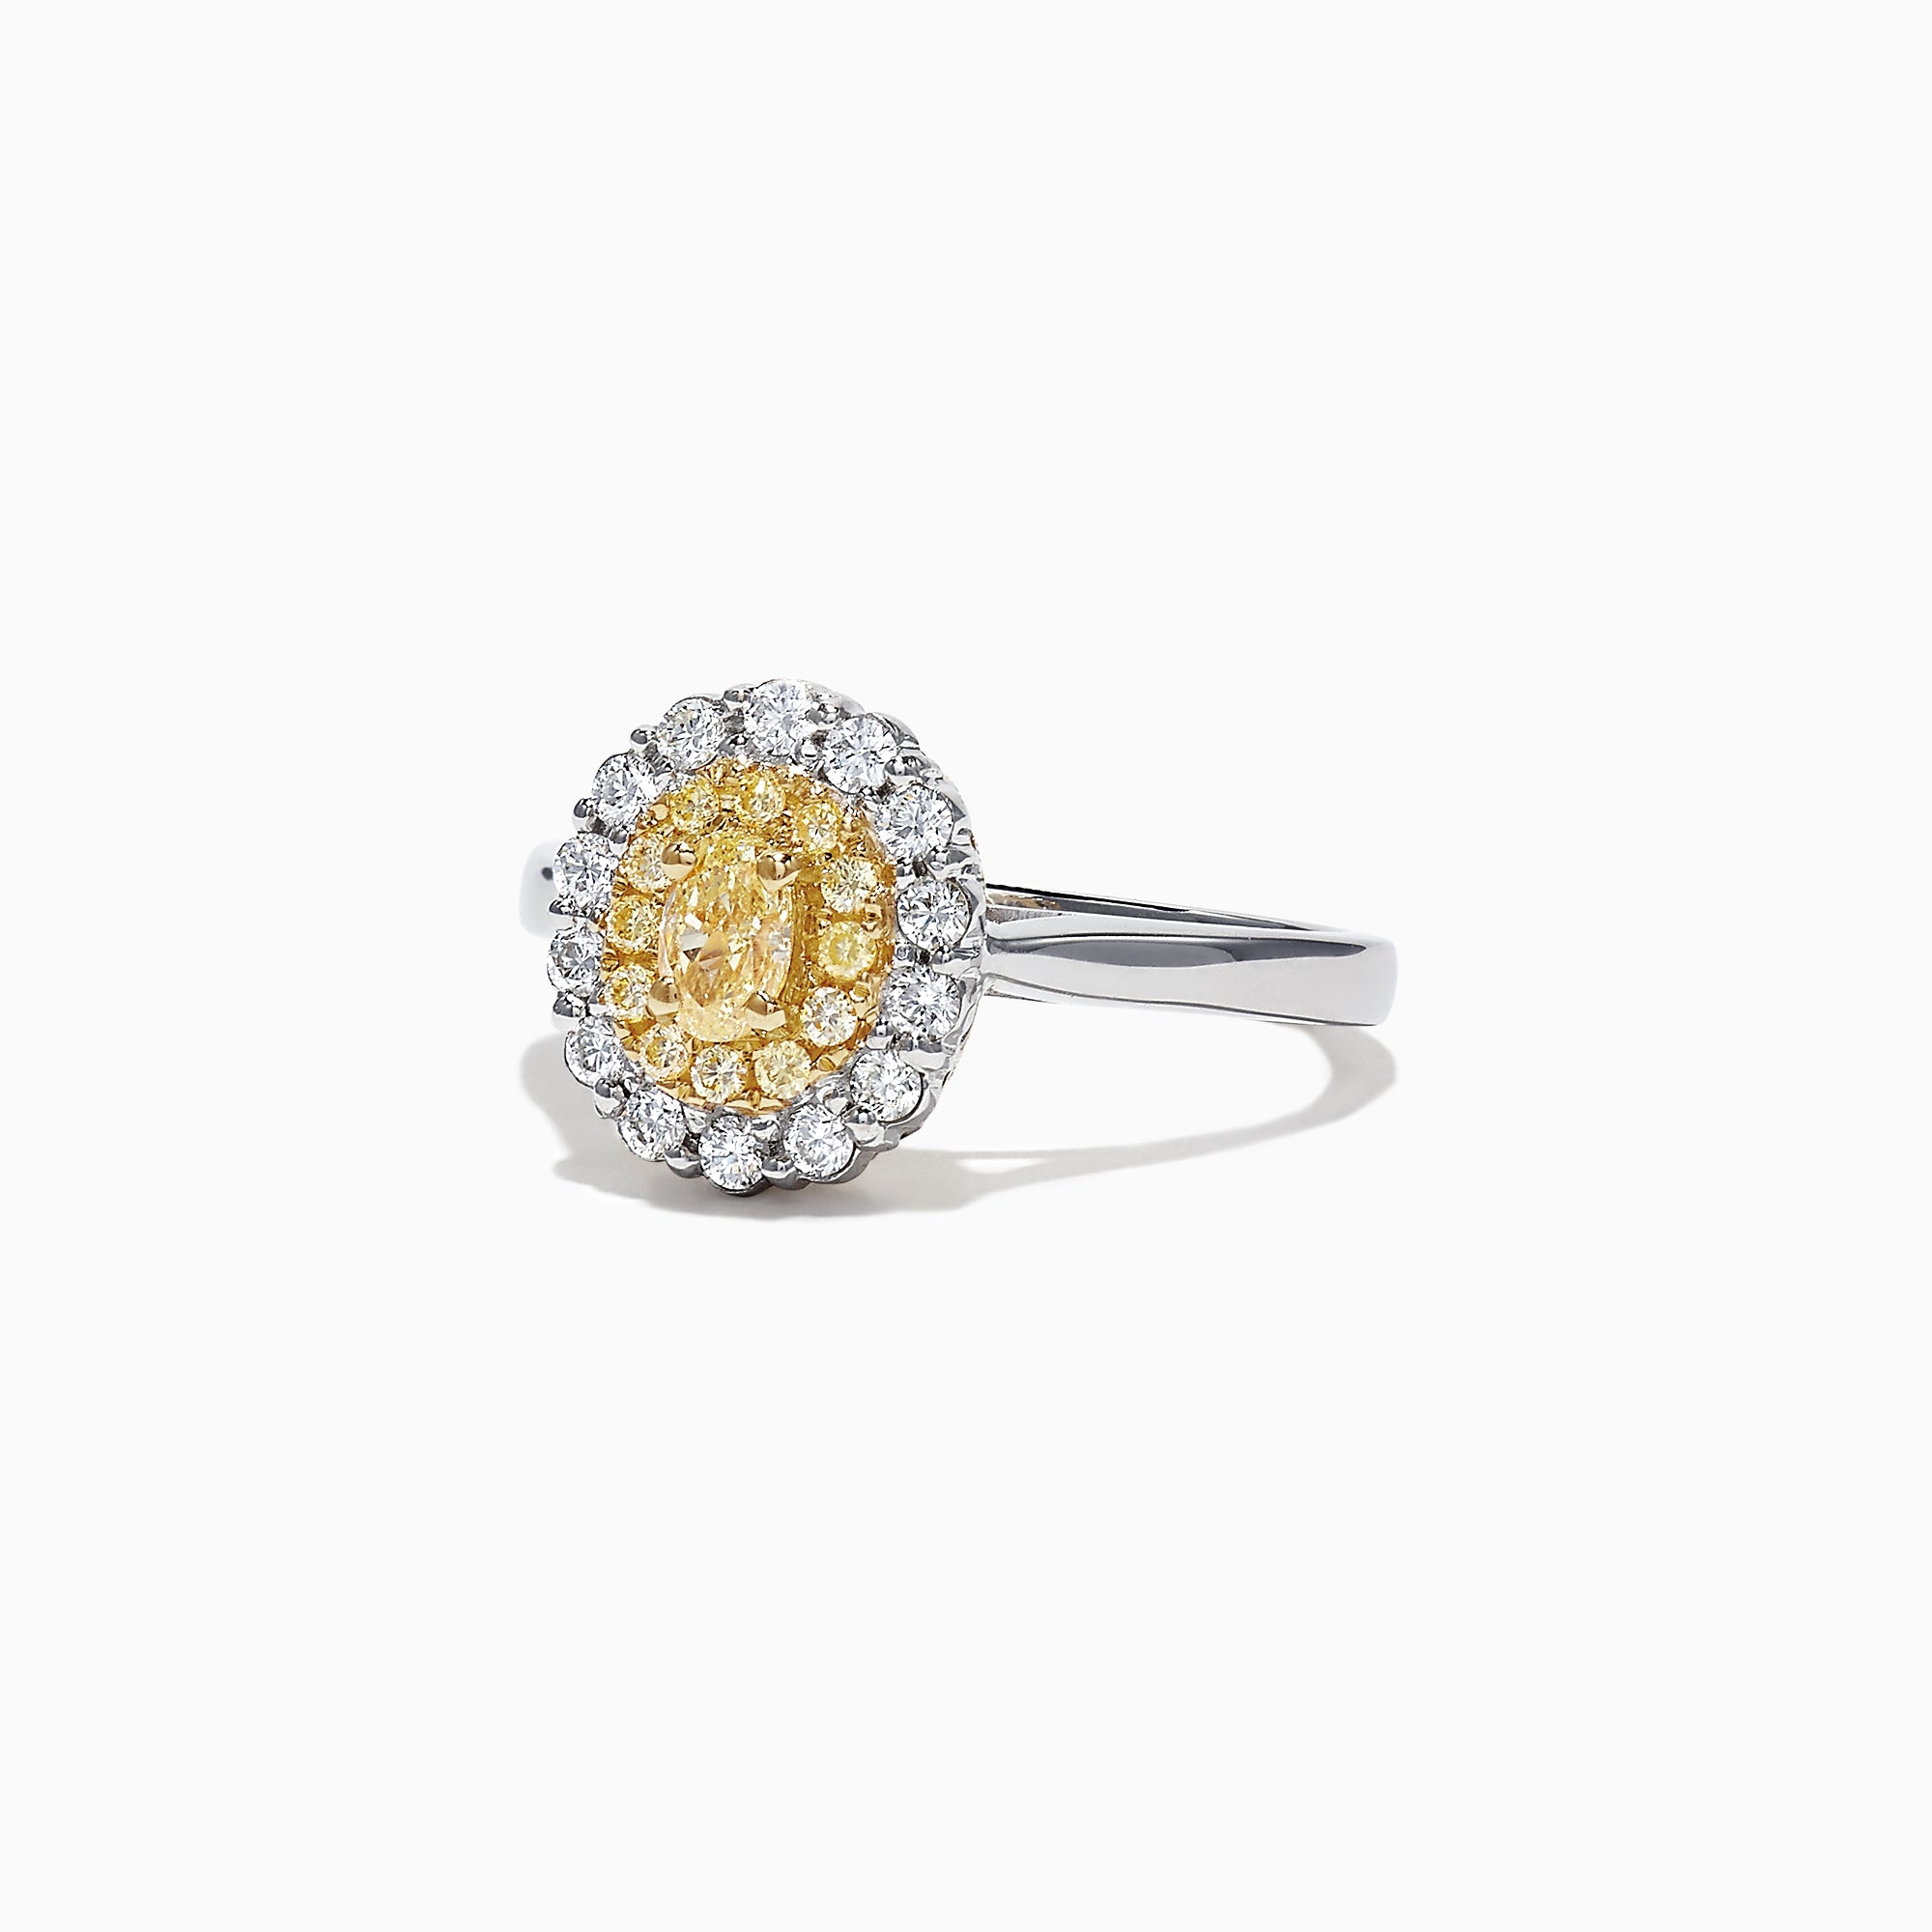 Effy Canare 18K Two-Tone Gold Yellow and White Diamond Ring, 0.65 TCW